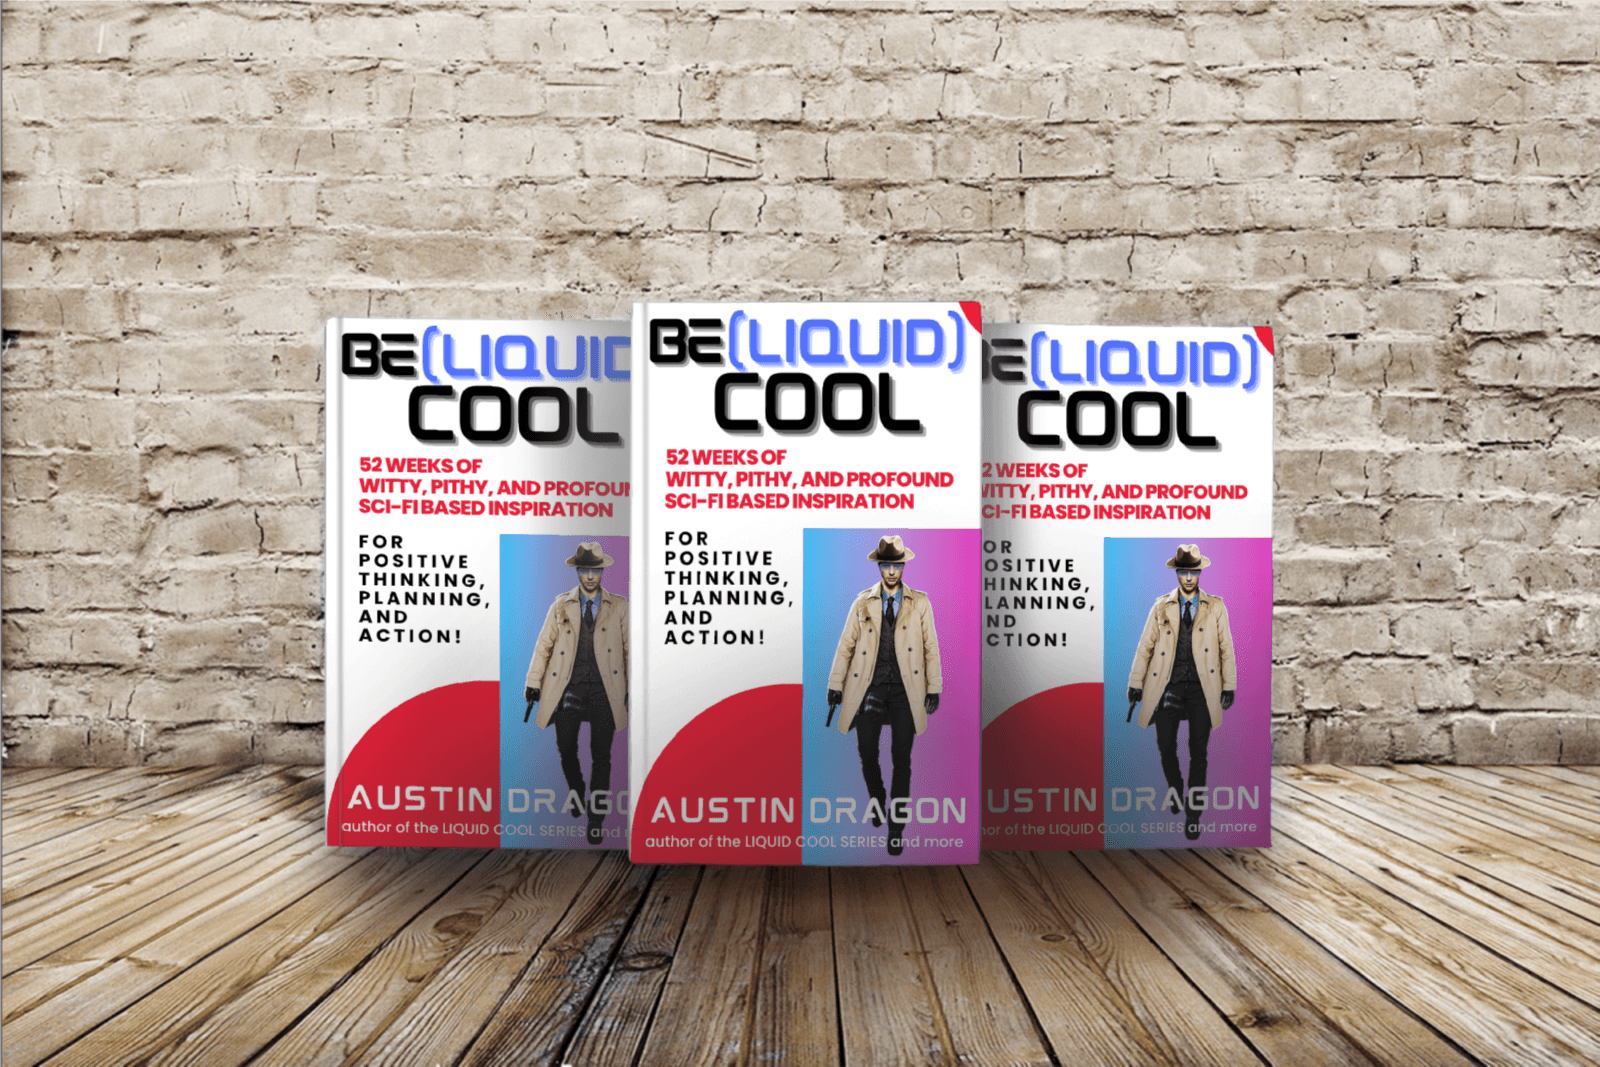 Be (Liquid) Cool: 52 Weeks of... (Inspirational Planner) Paperback